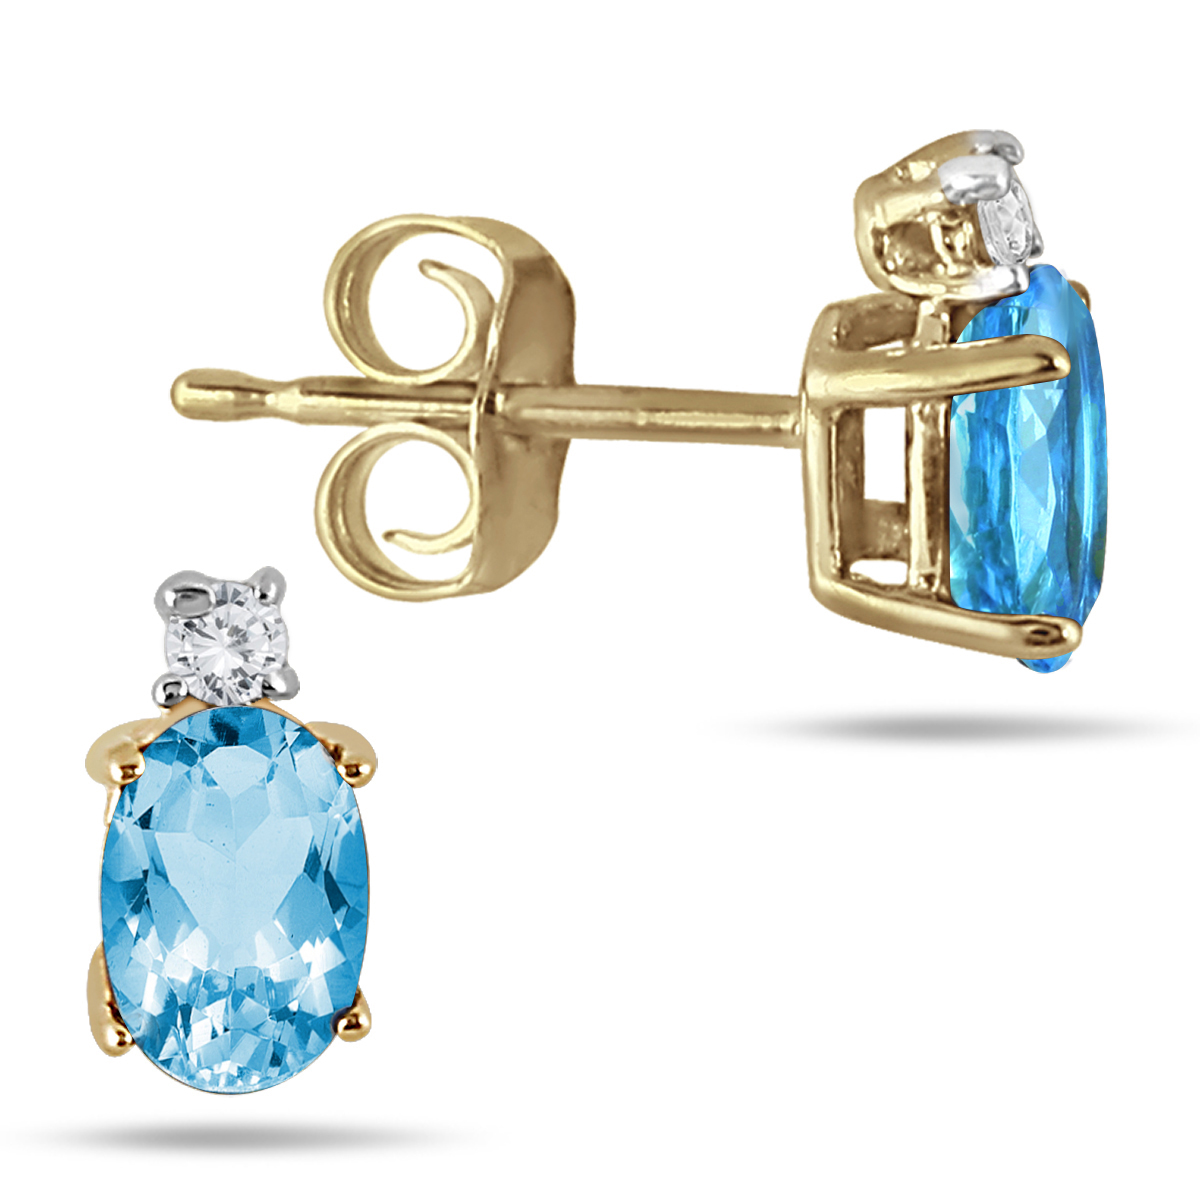 Oval Blue Topaz Drop and Diamond Earrings in 14K Yellow Gold